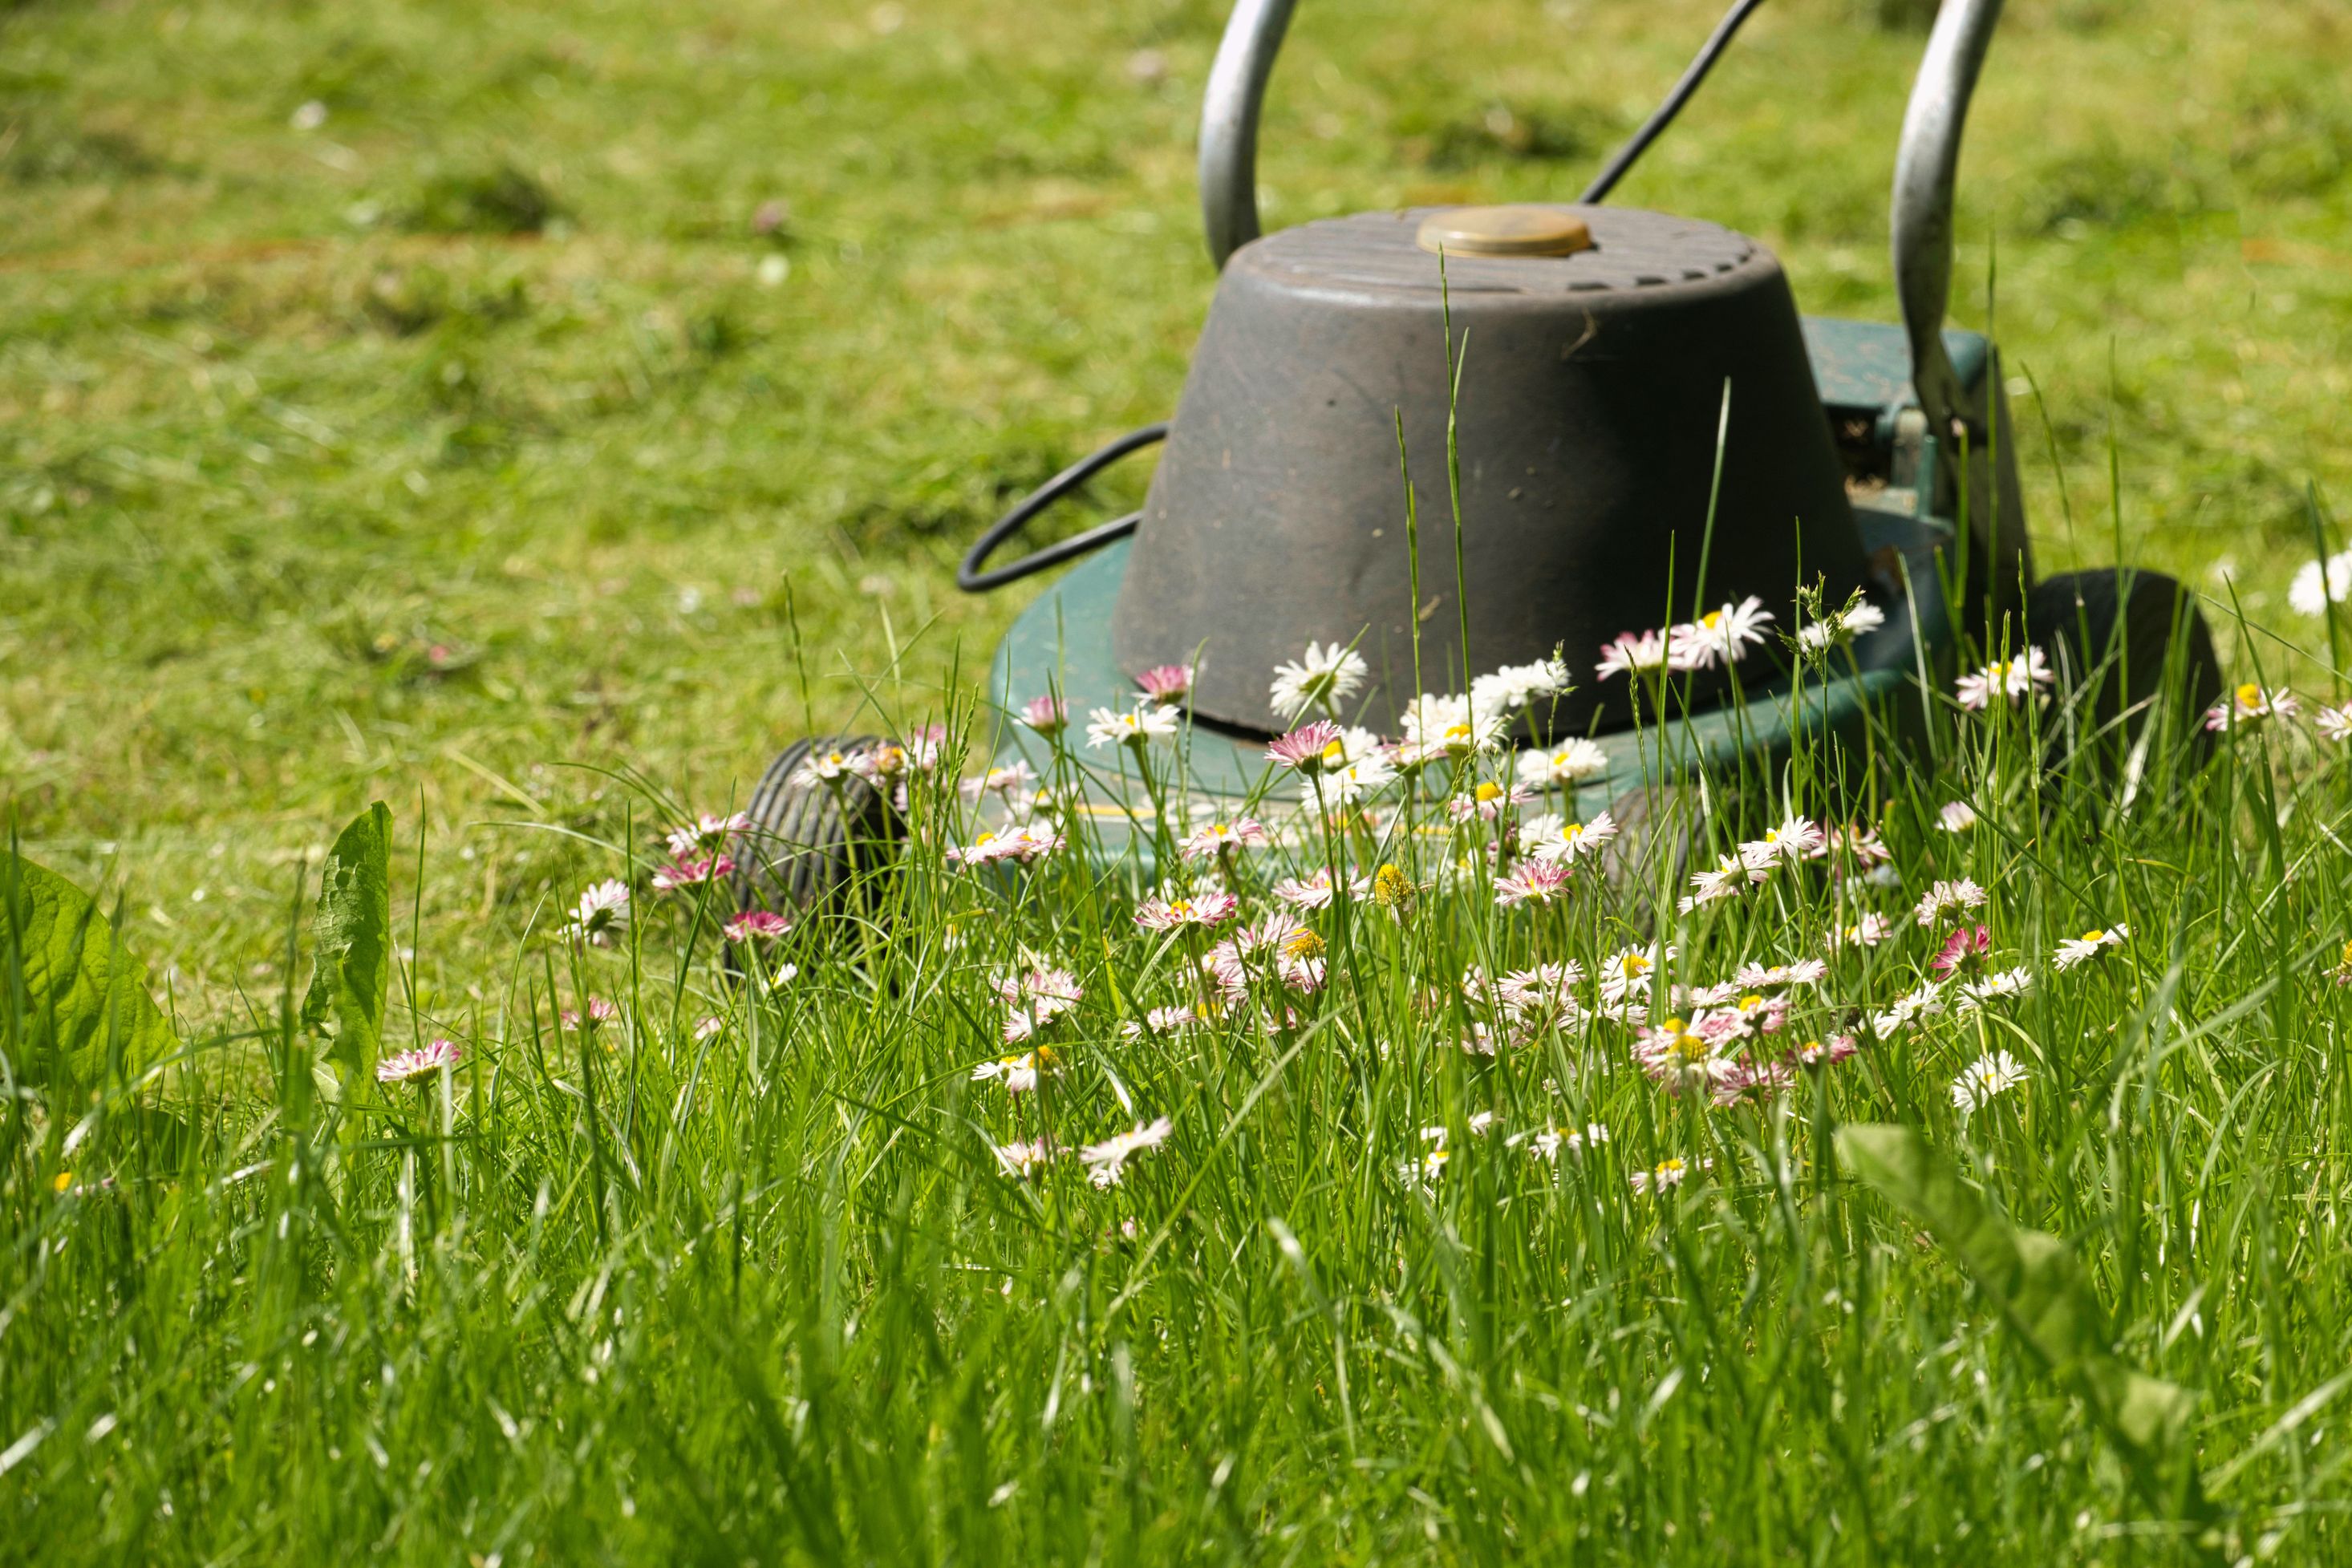 No Mow May 2023: The Reason We Should Put Our Lawnmowers Down